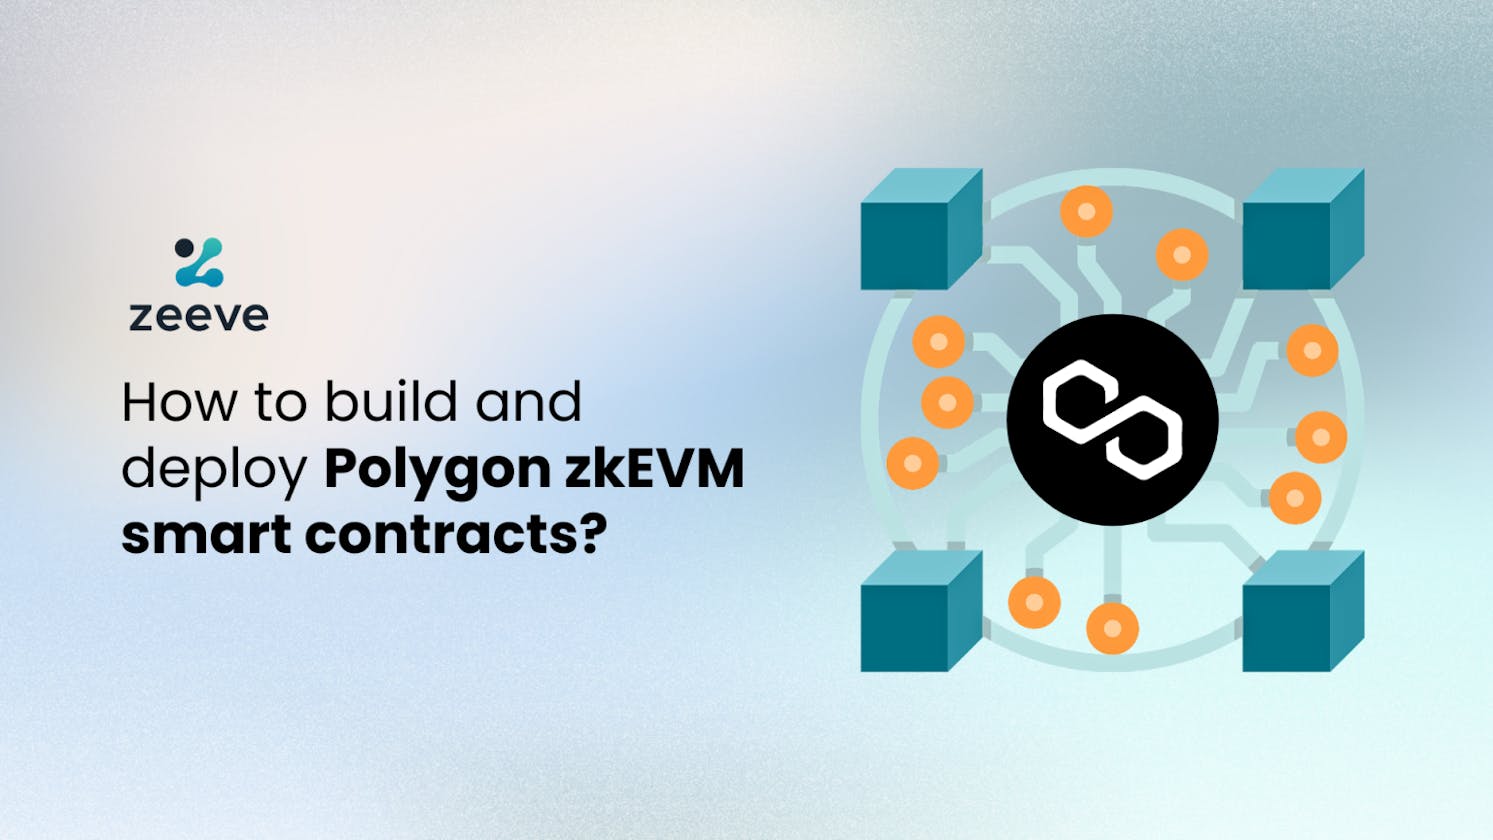 How to build and deploy a smart contract on Polygon zkEVM?